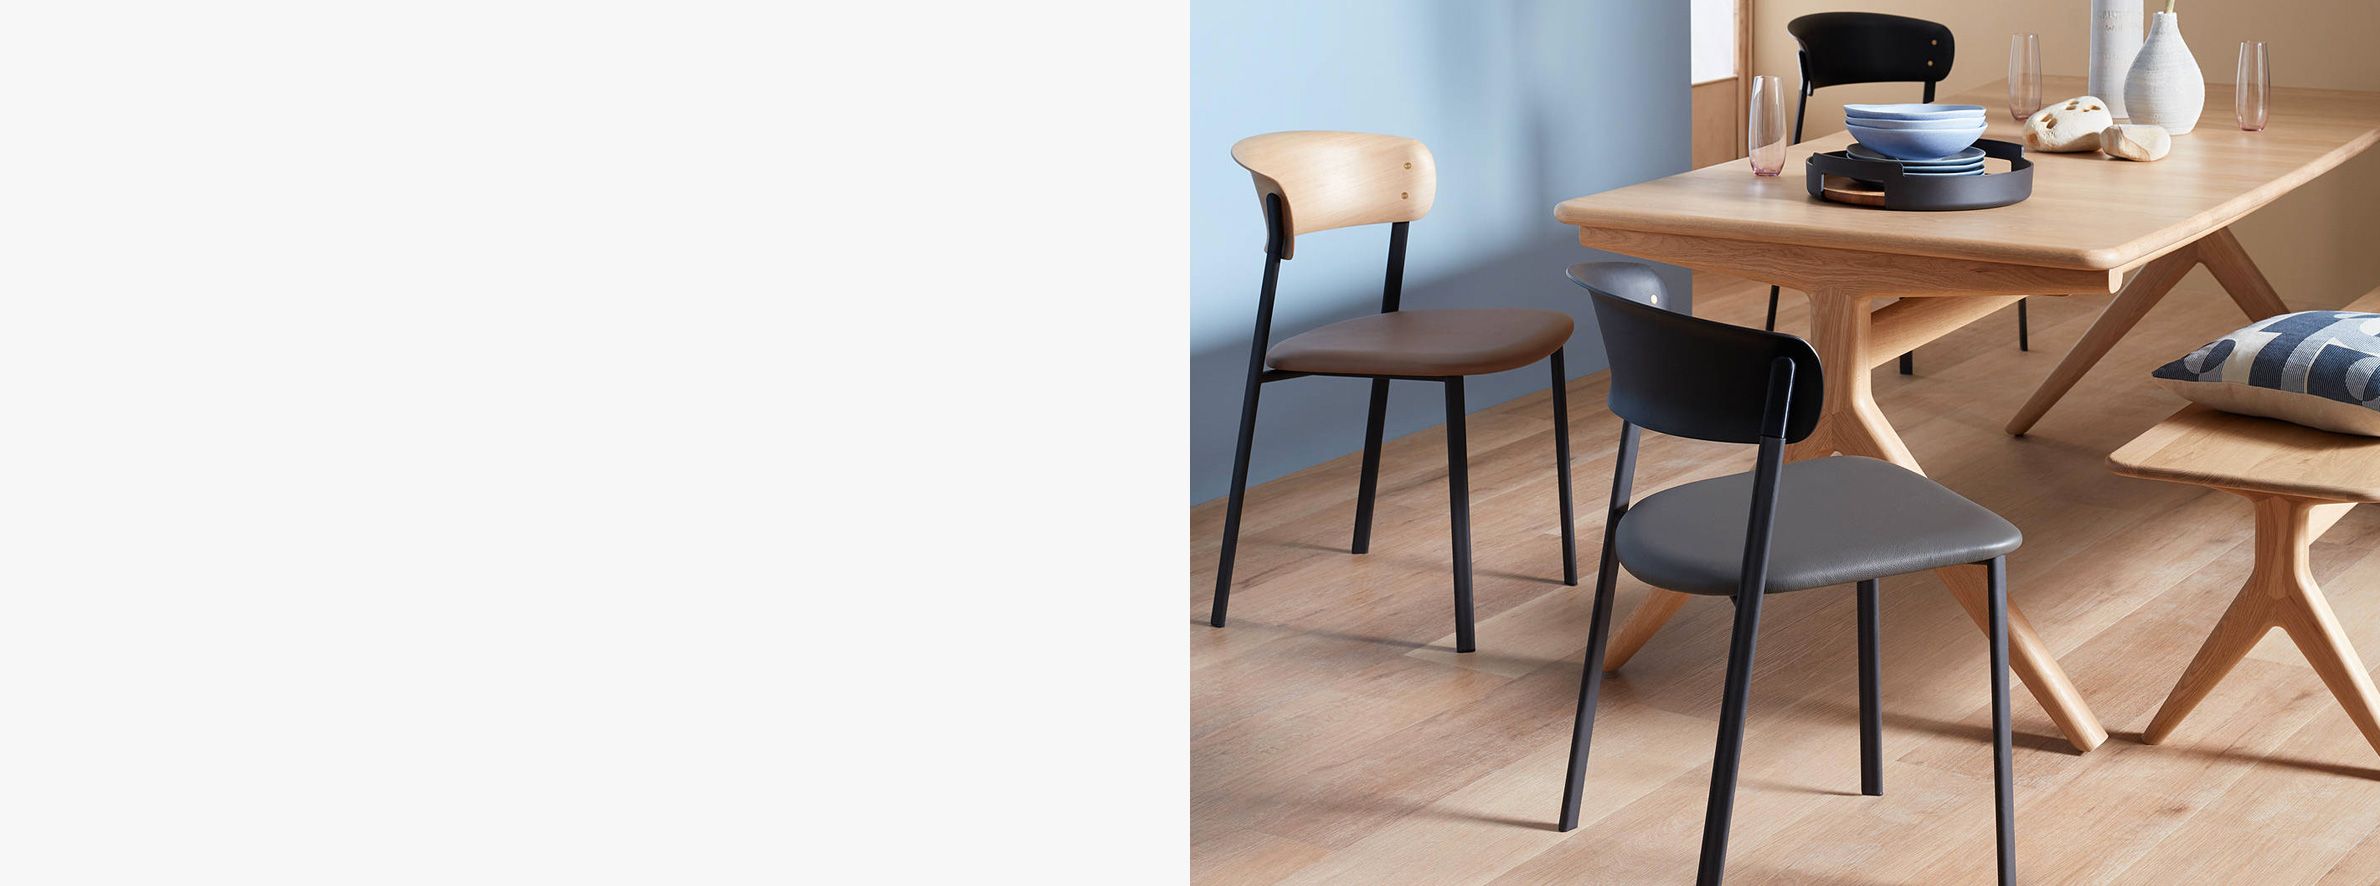 Foldable Dining Tables John Lewis Partners